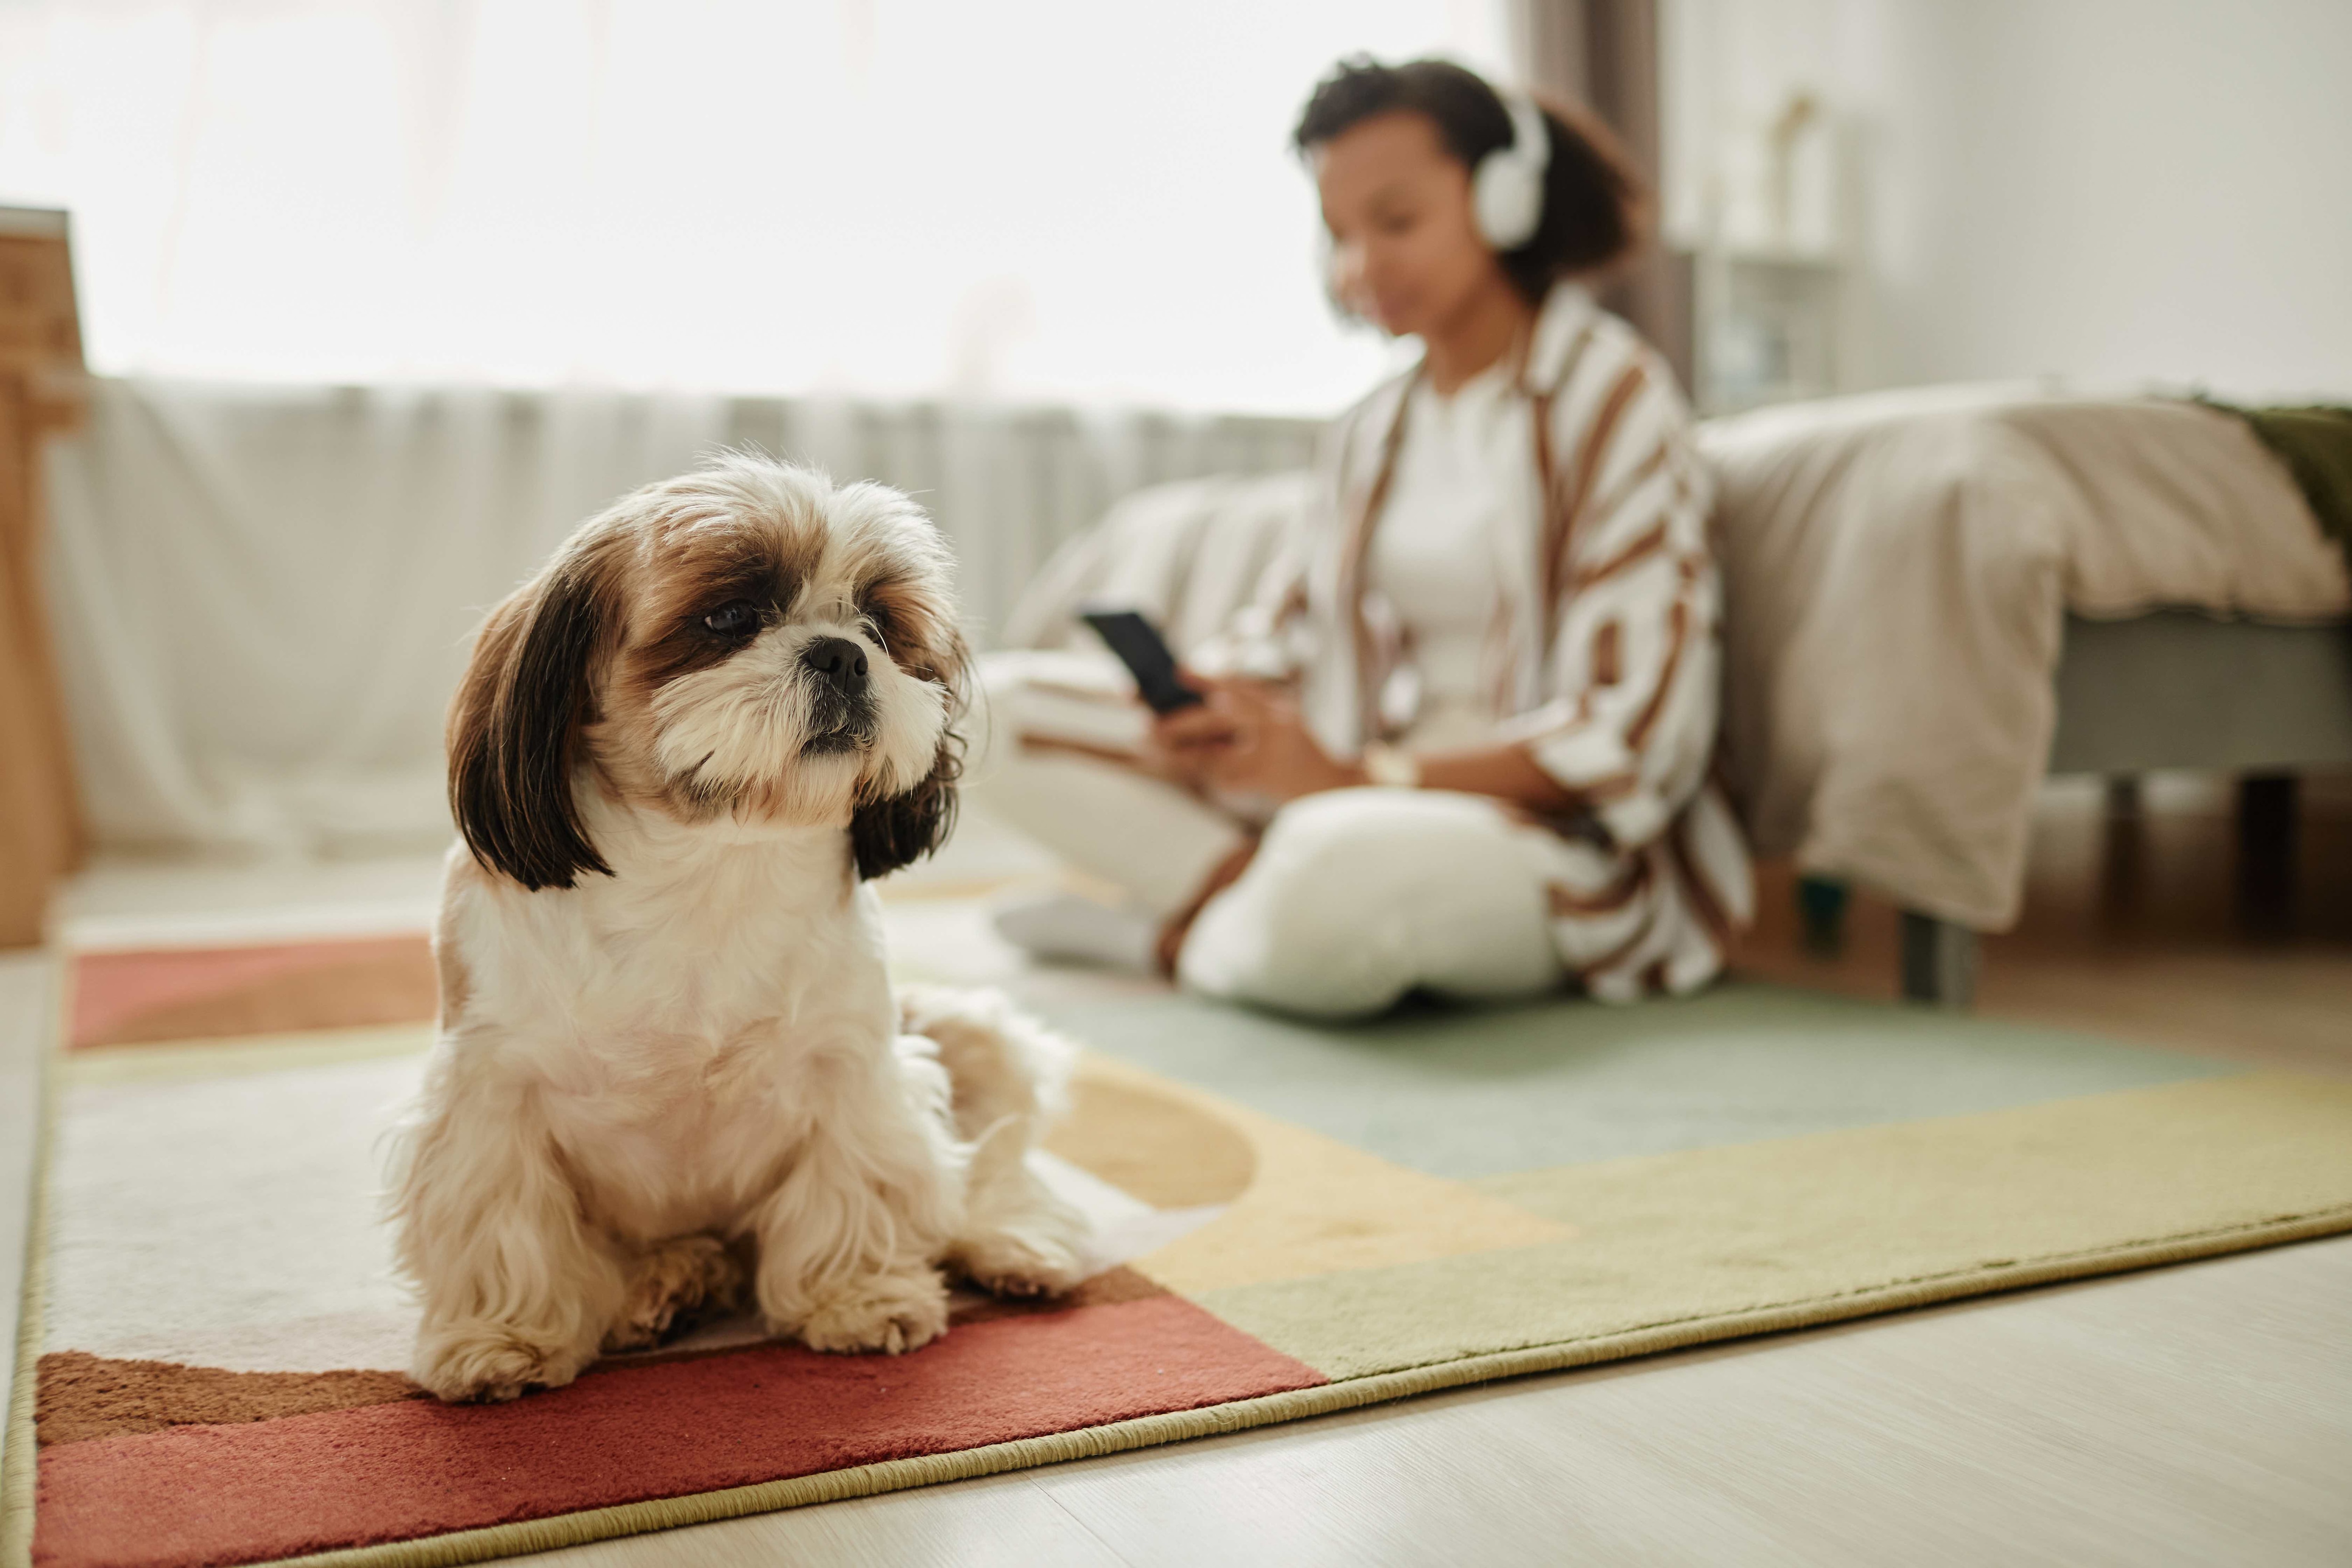 brown and white shih tzu dog sitting on a rug with a person in the background